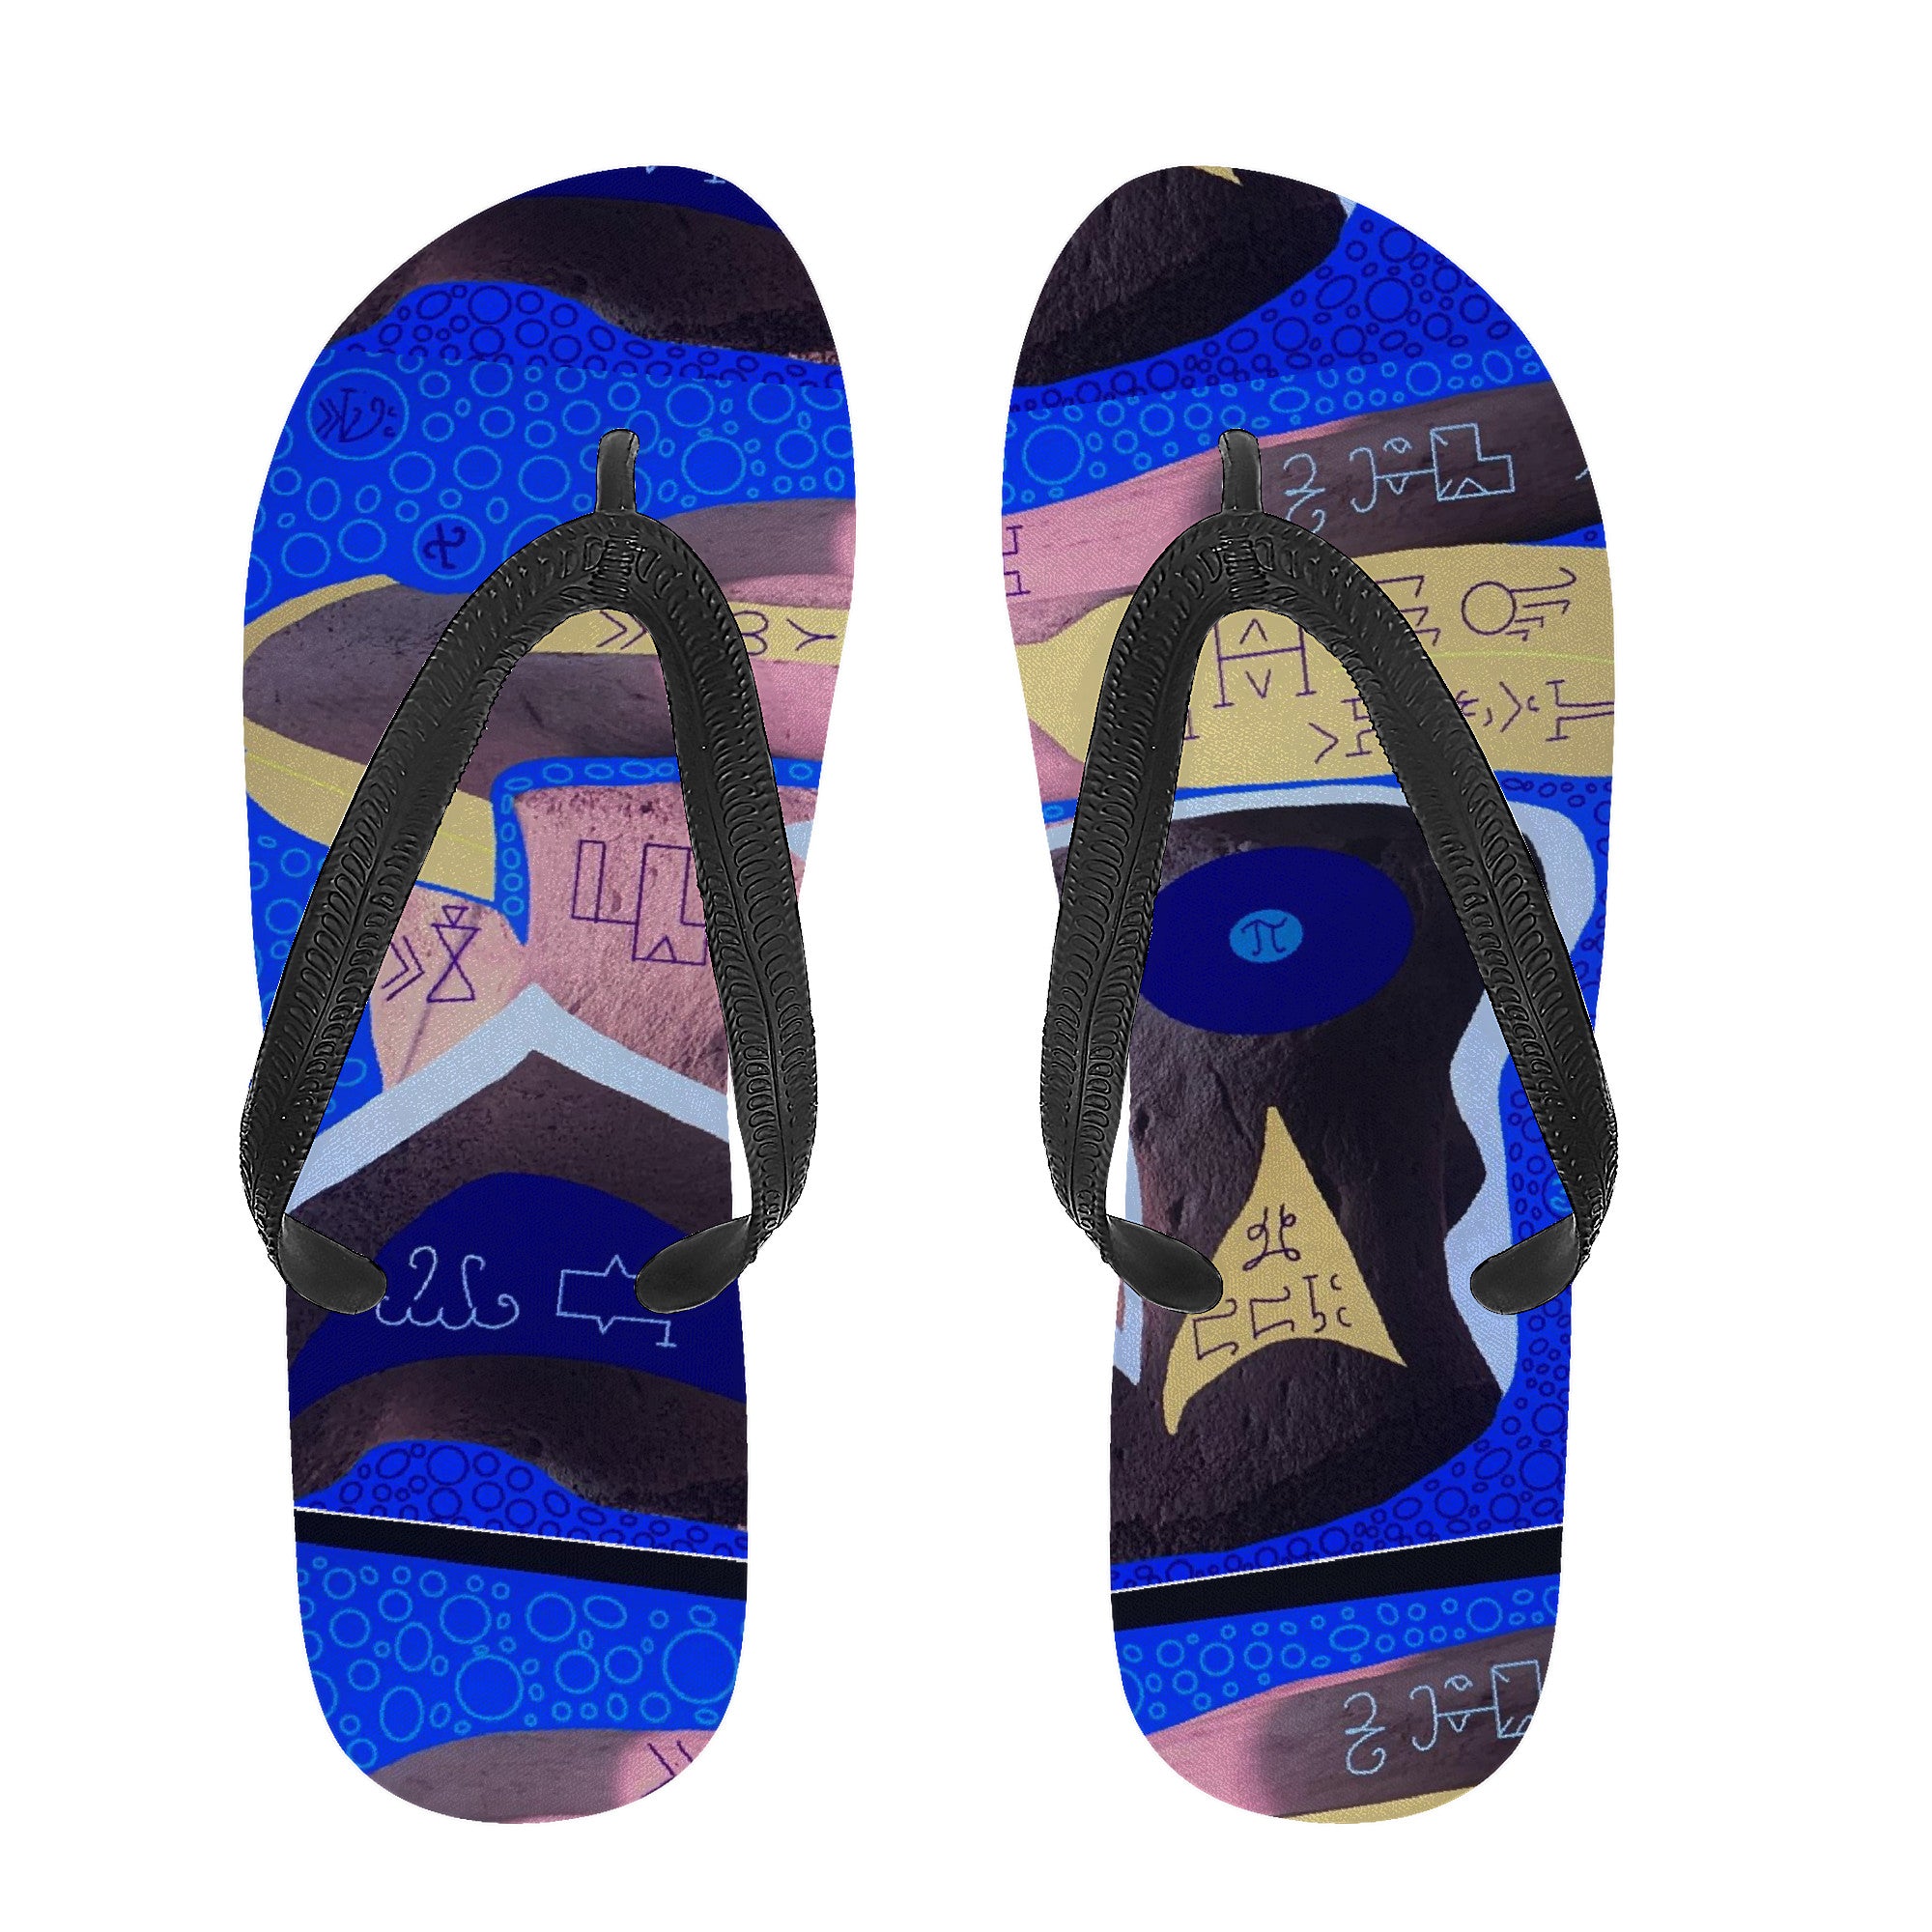 Coolourful flipflop- Forever in peace flip by Sylliboy - Shoe Zero